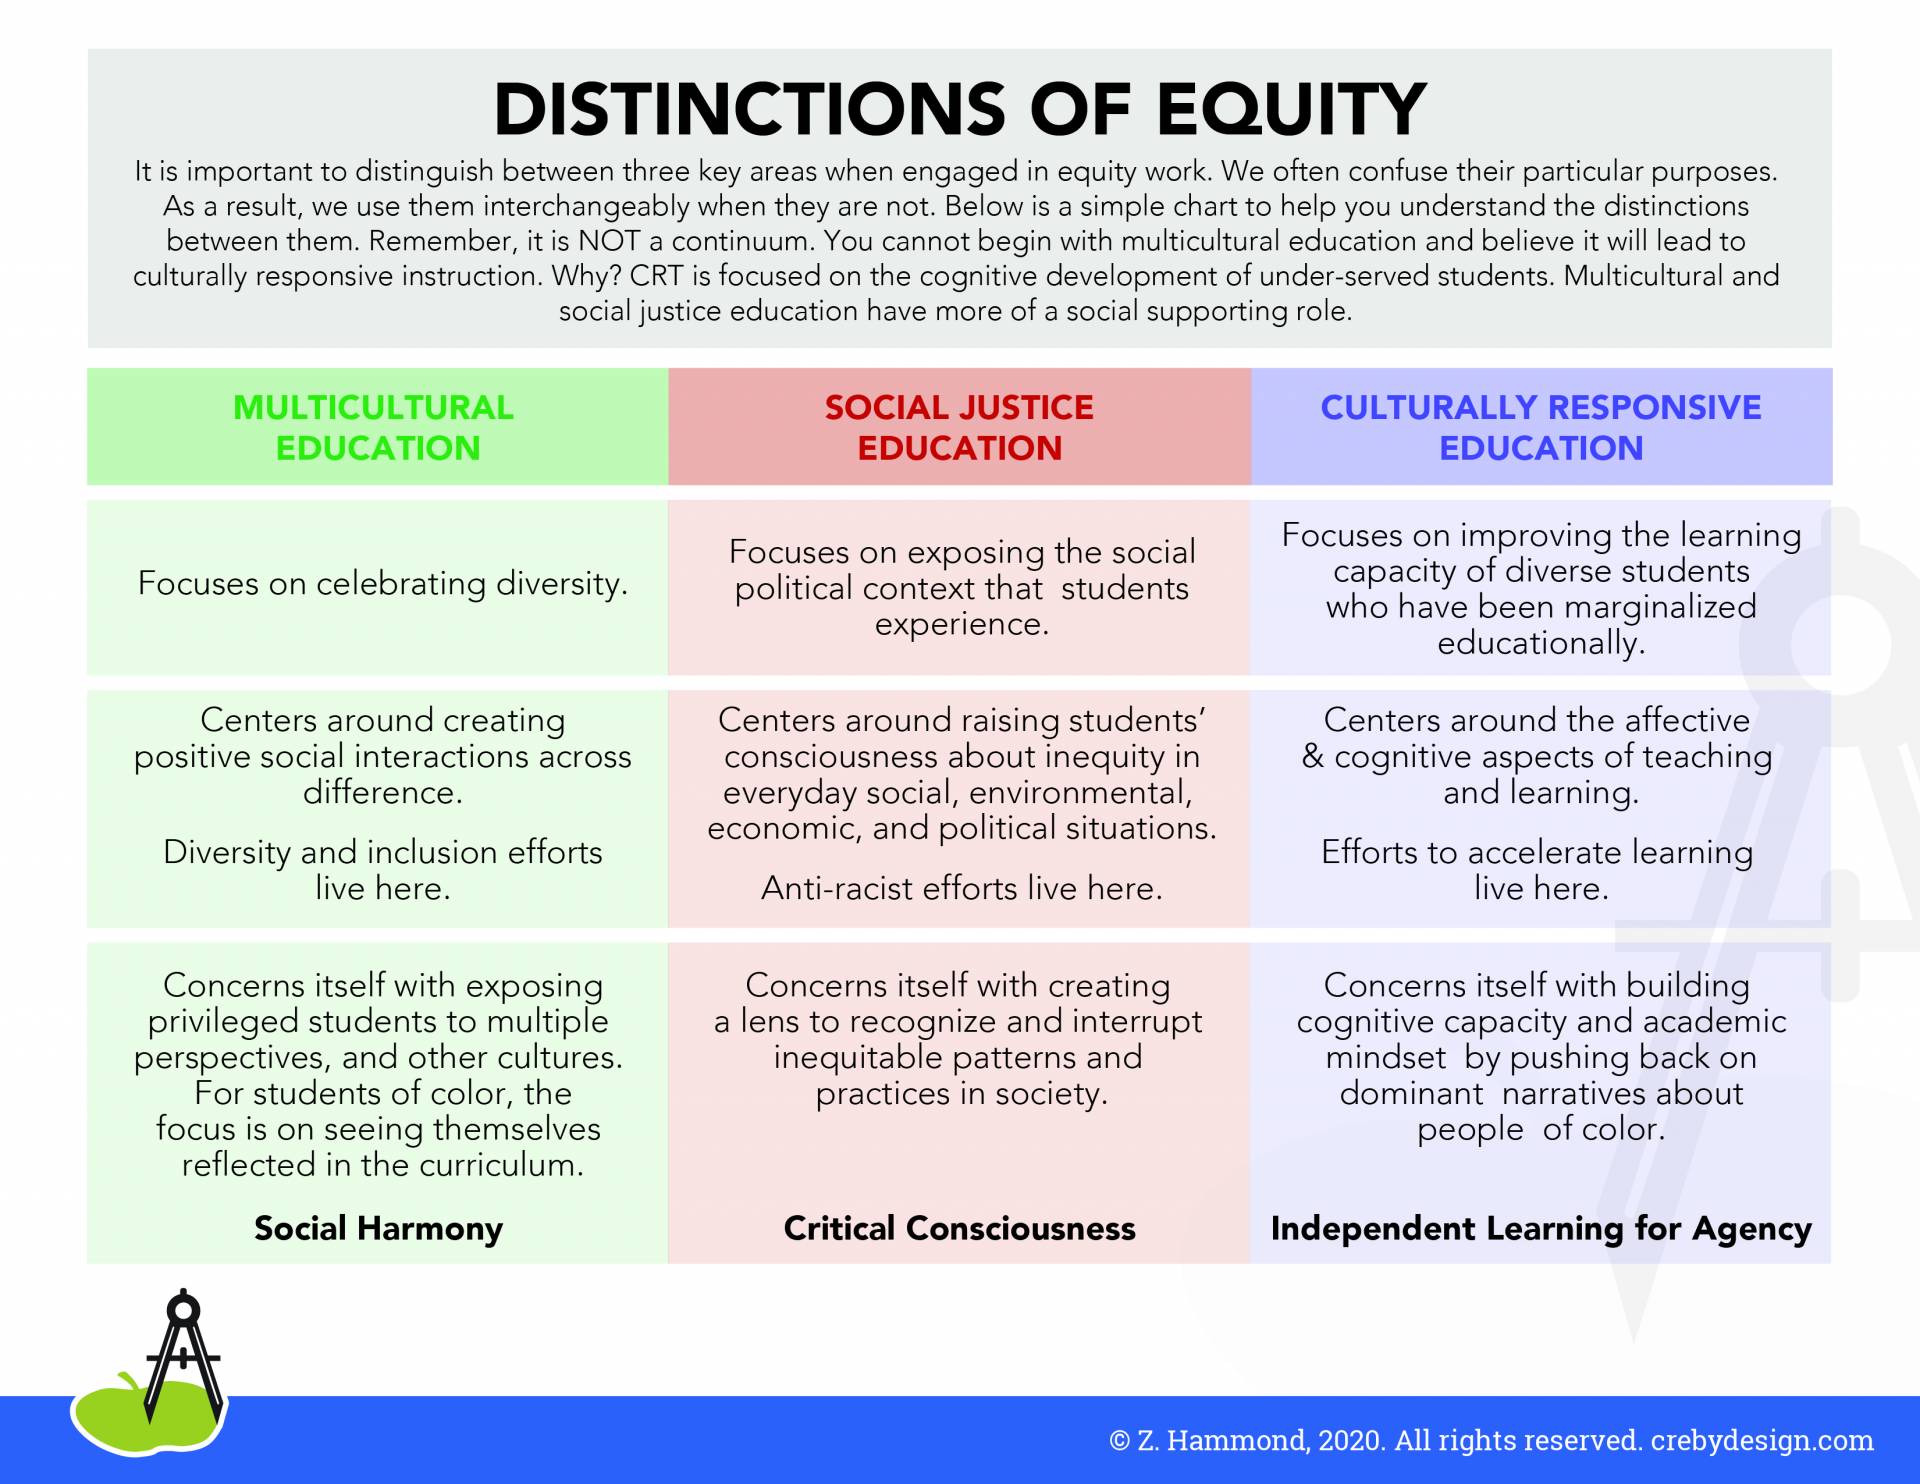 Distinctions-of-Equity_2020_color-e1589955039436.jpg